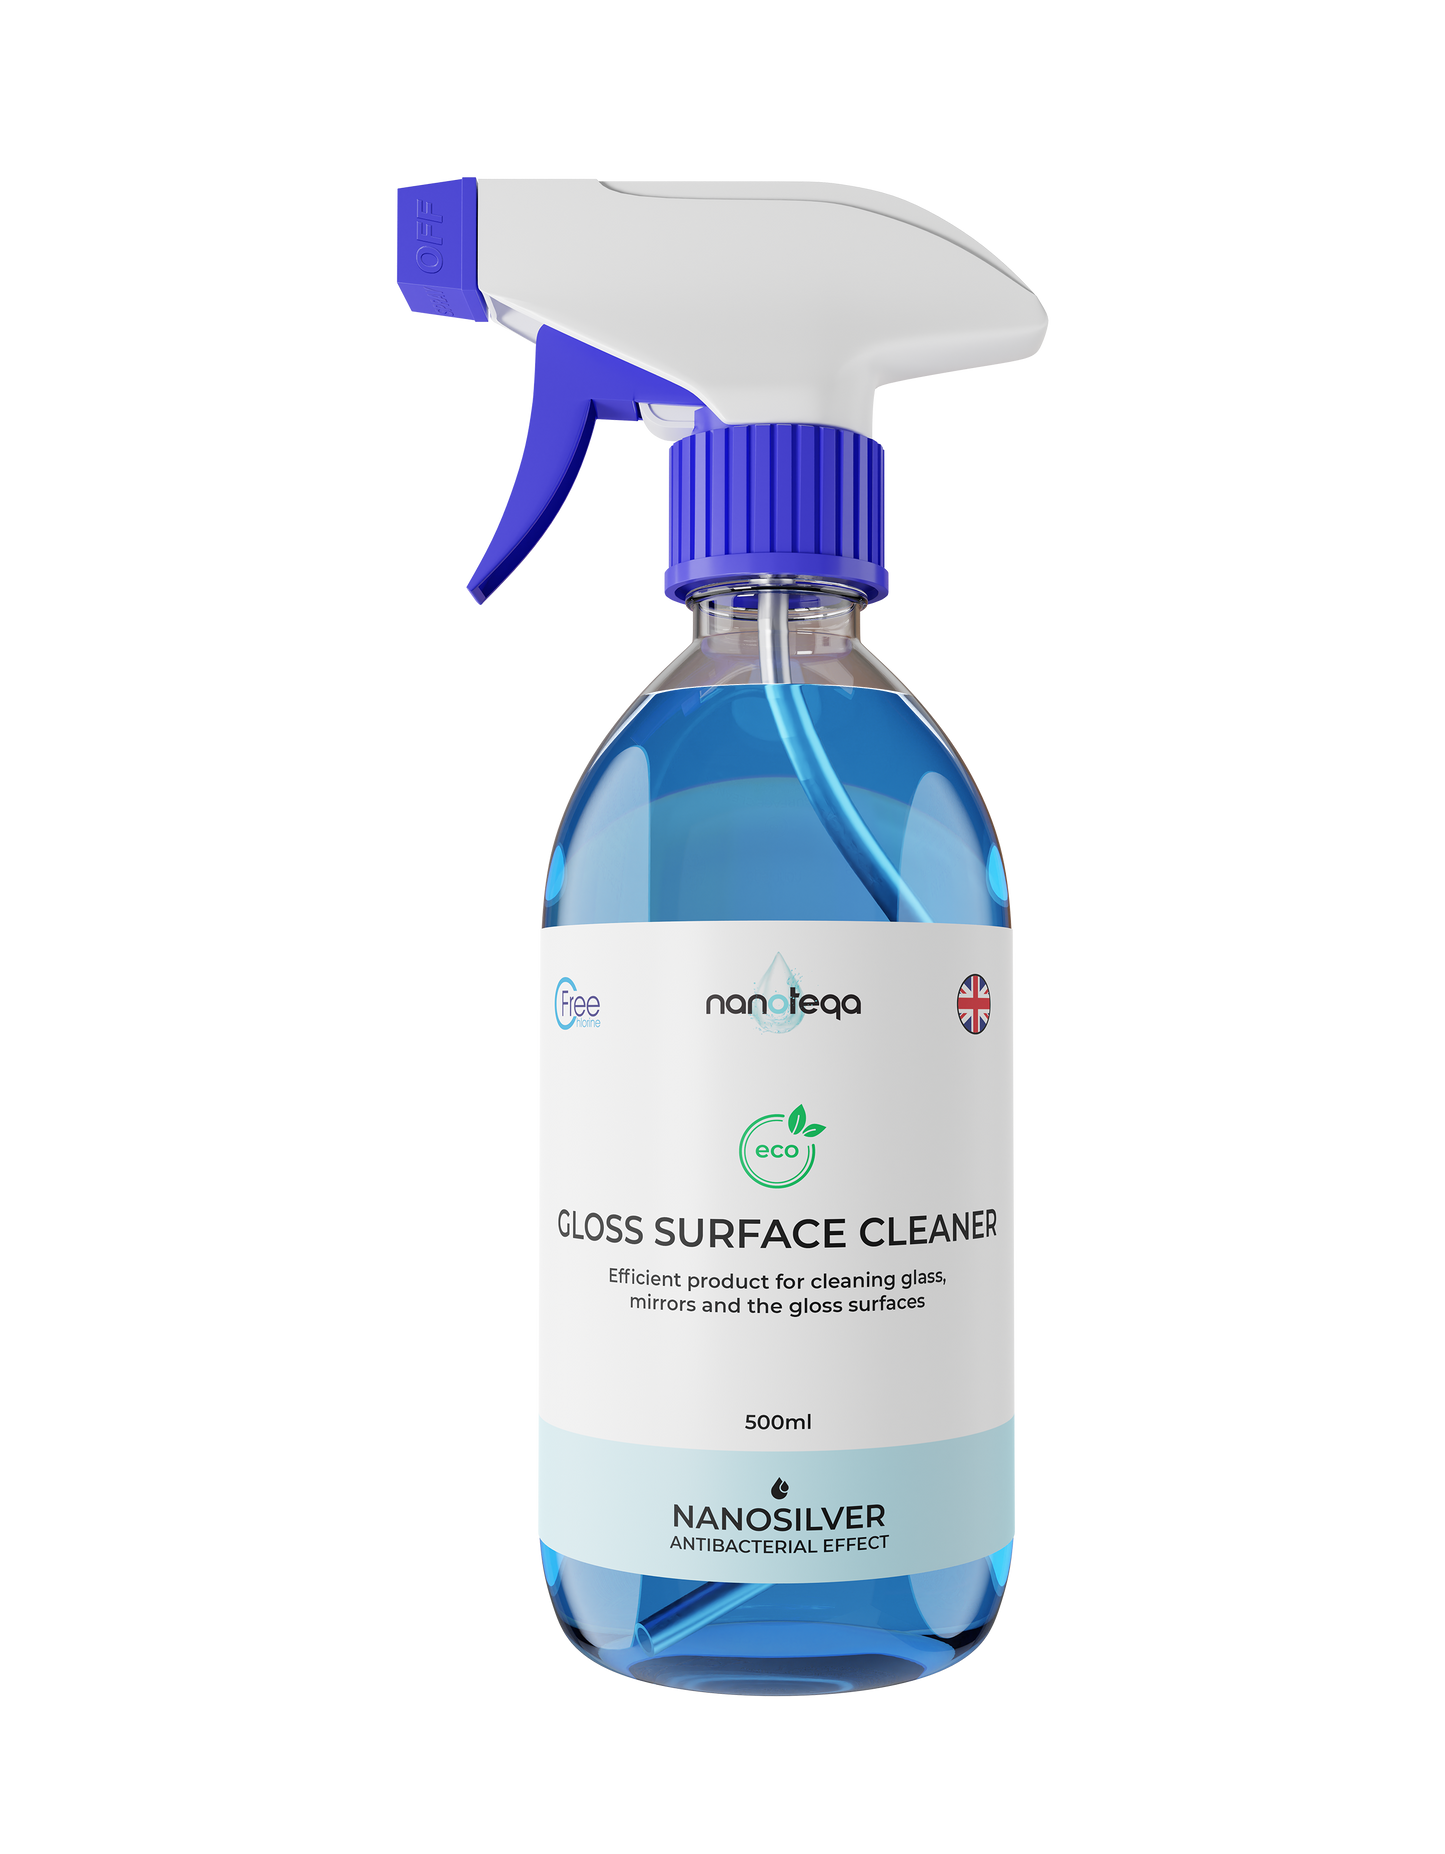 Gloss Surface Cleaner